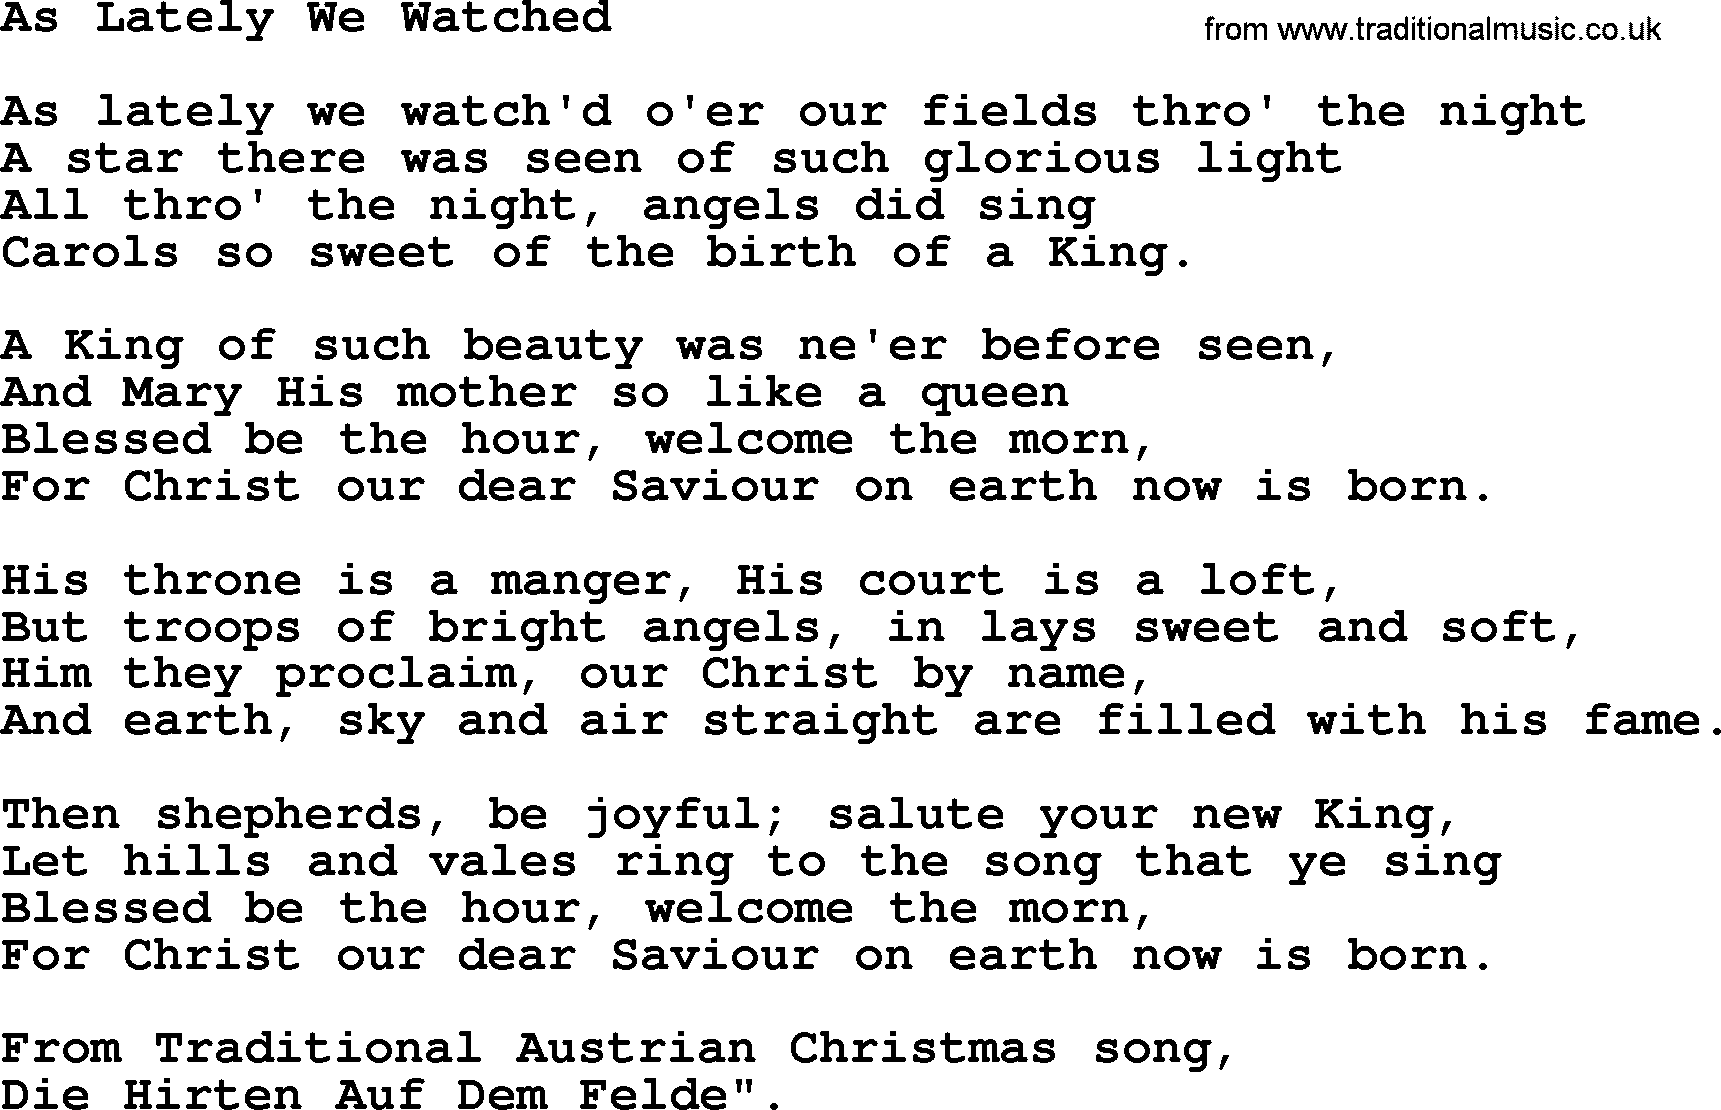 280 Christmas Hymns and songs with PowerPoints and PDF, title: As Lately We Watched, lyrics, PPT and PDF